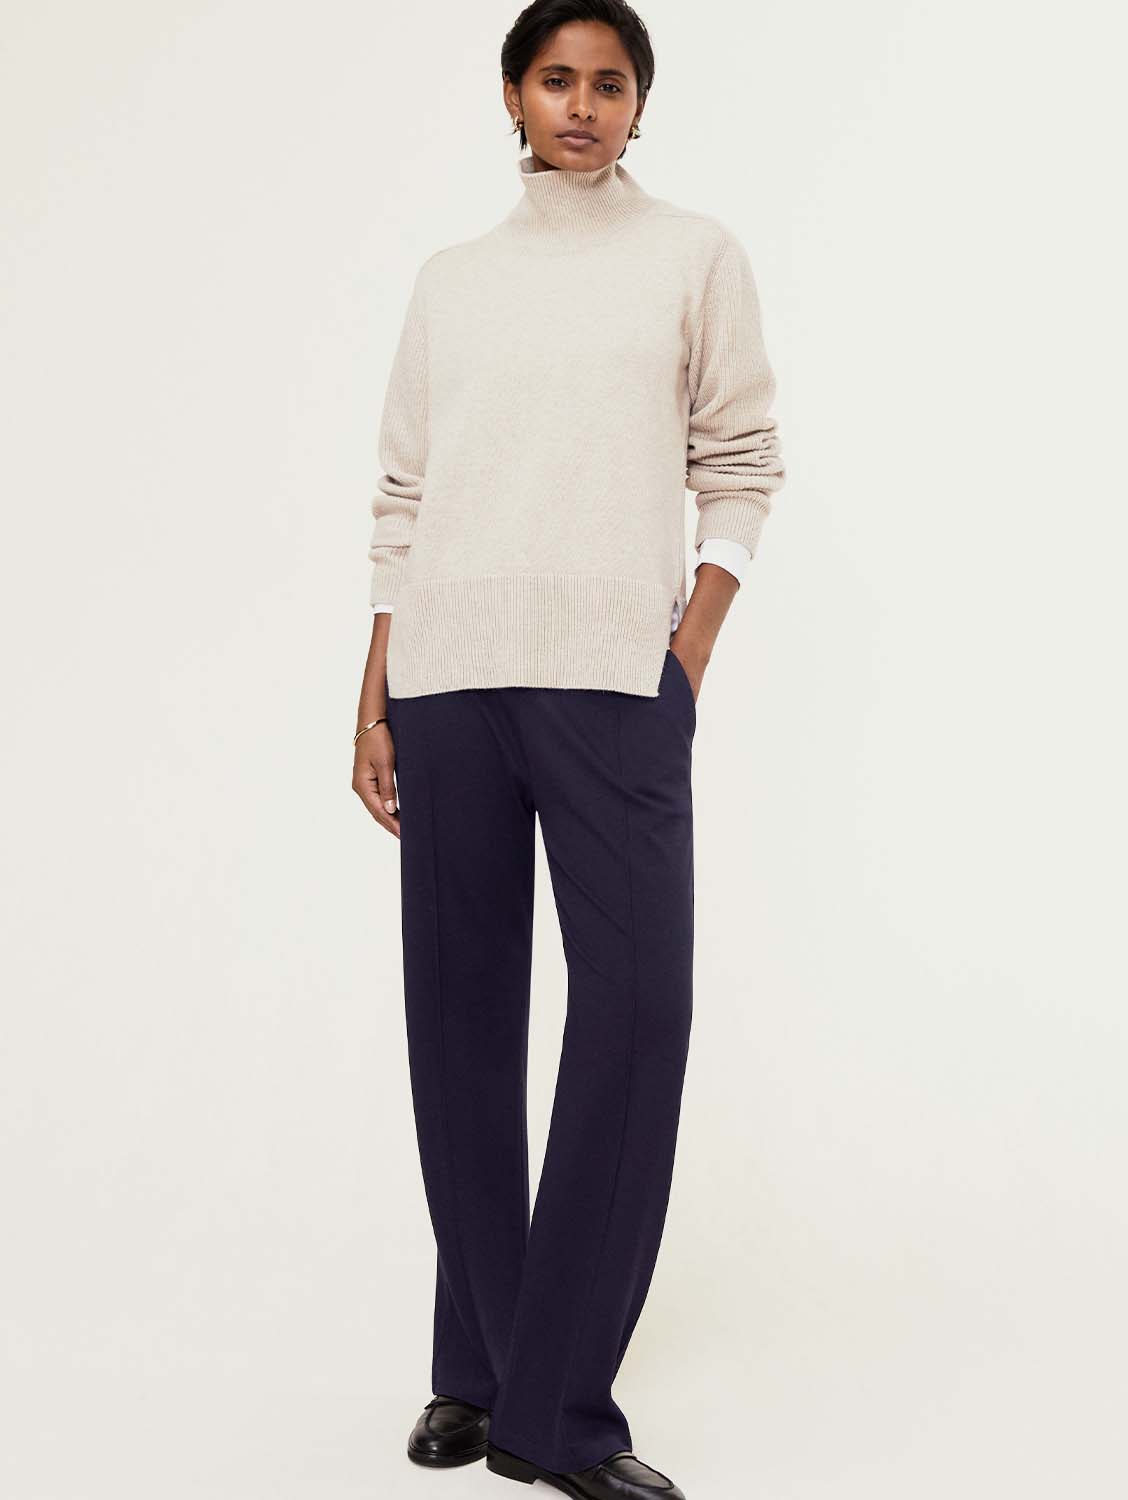 Women's Sustainable Trousers - Cargo, Culottes, Joggers, Palazzo ...